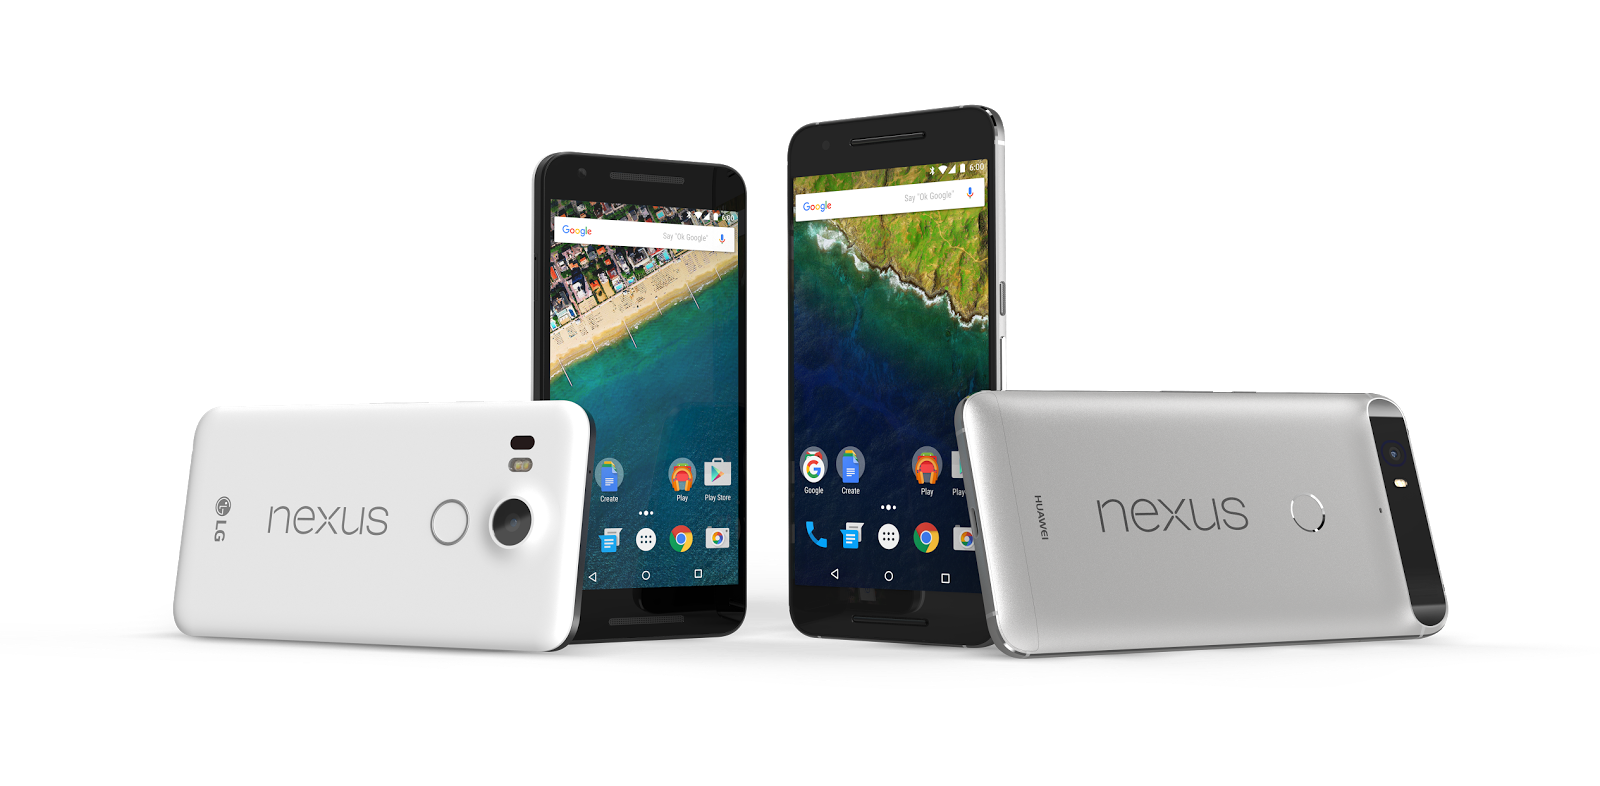 Google Nexus 5X and Nexus 6P officially announced, built in collaboration with LG and Huawei, respectively